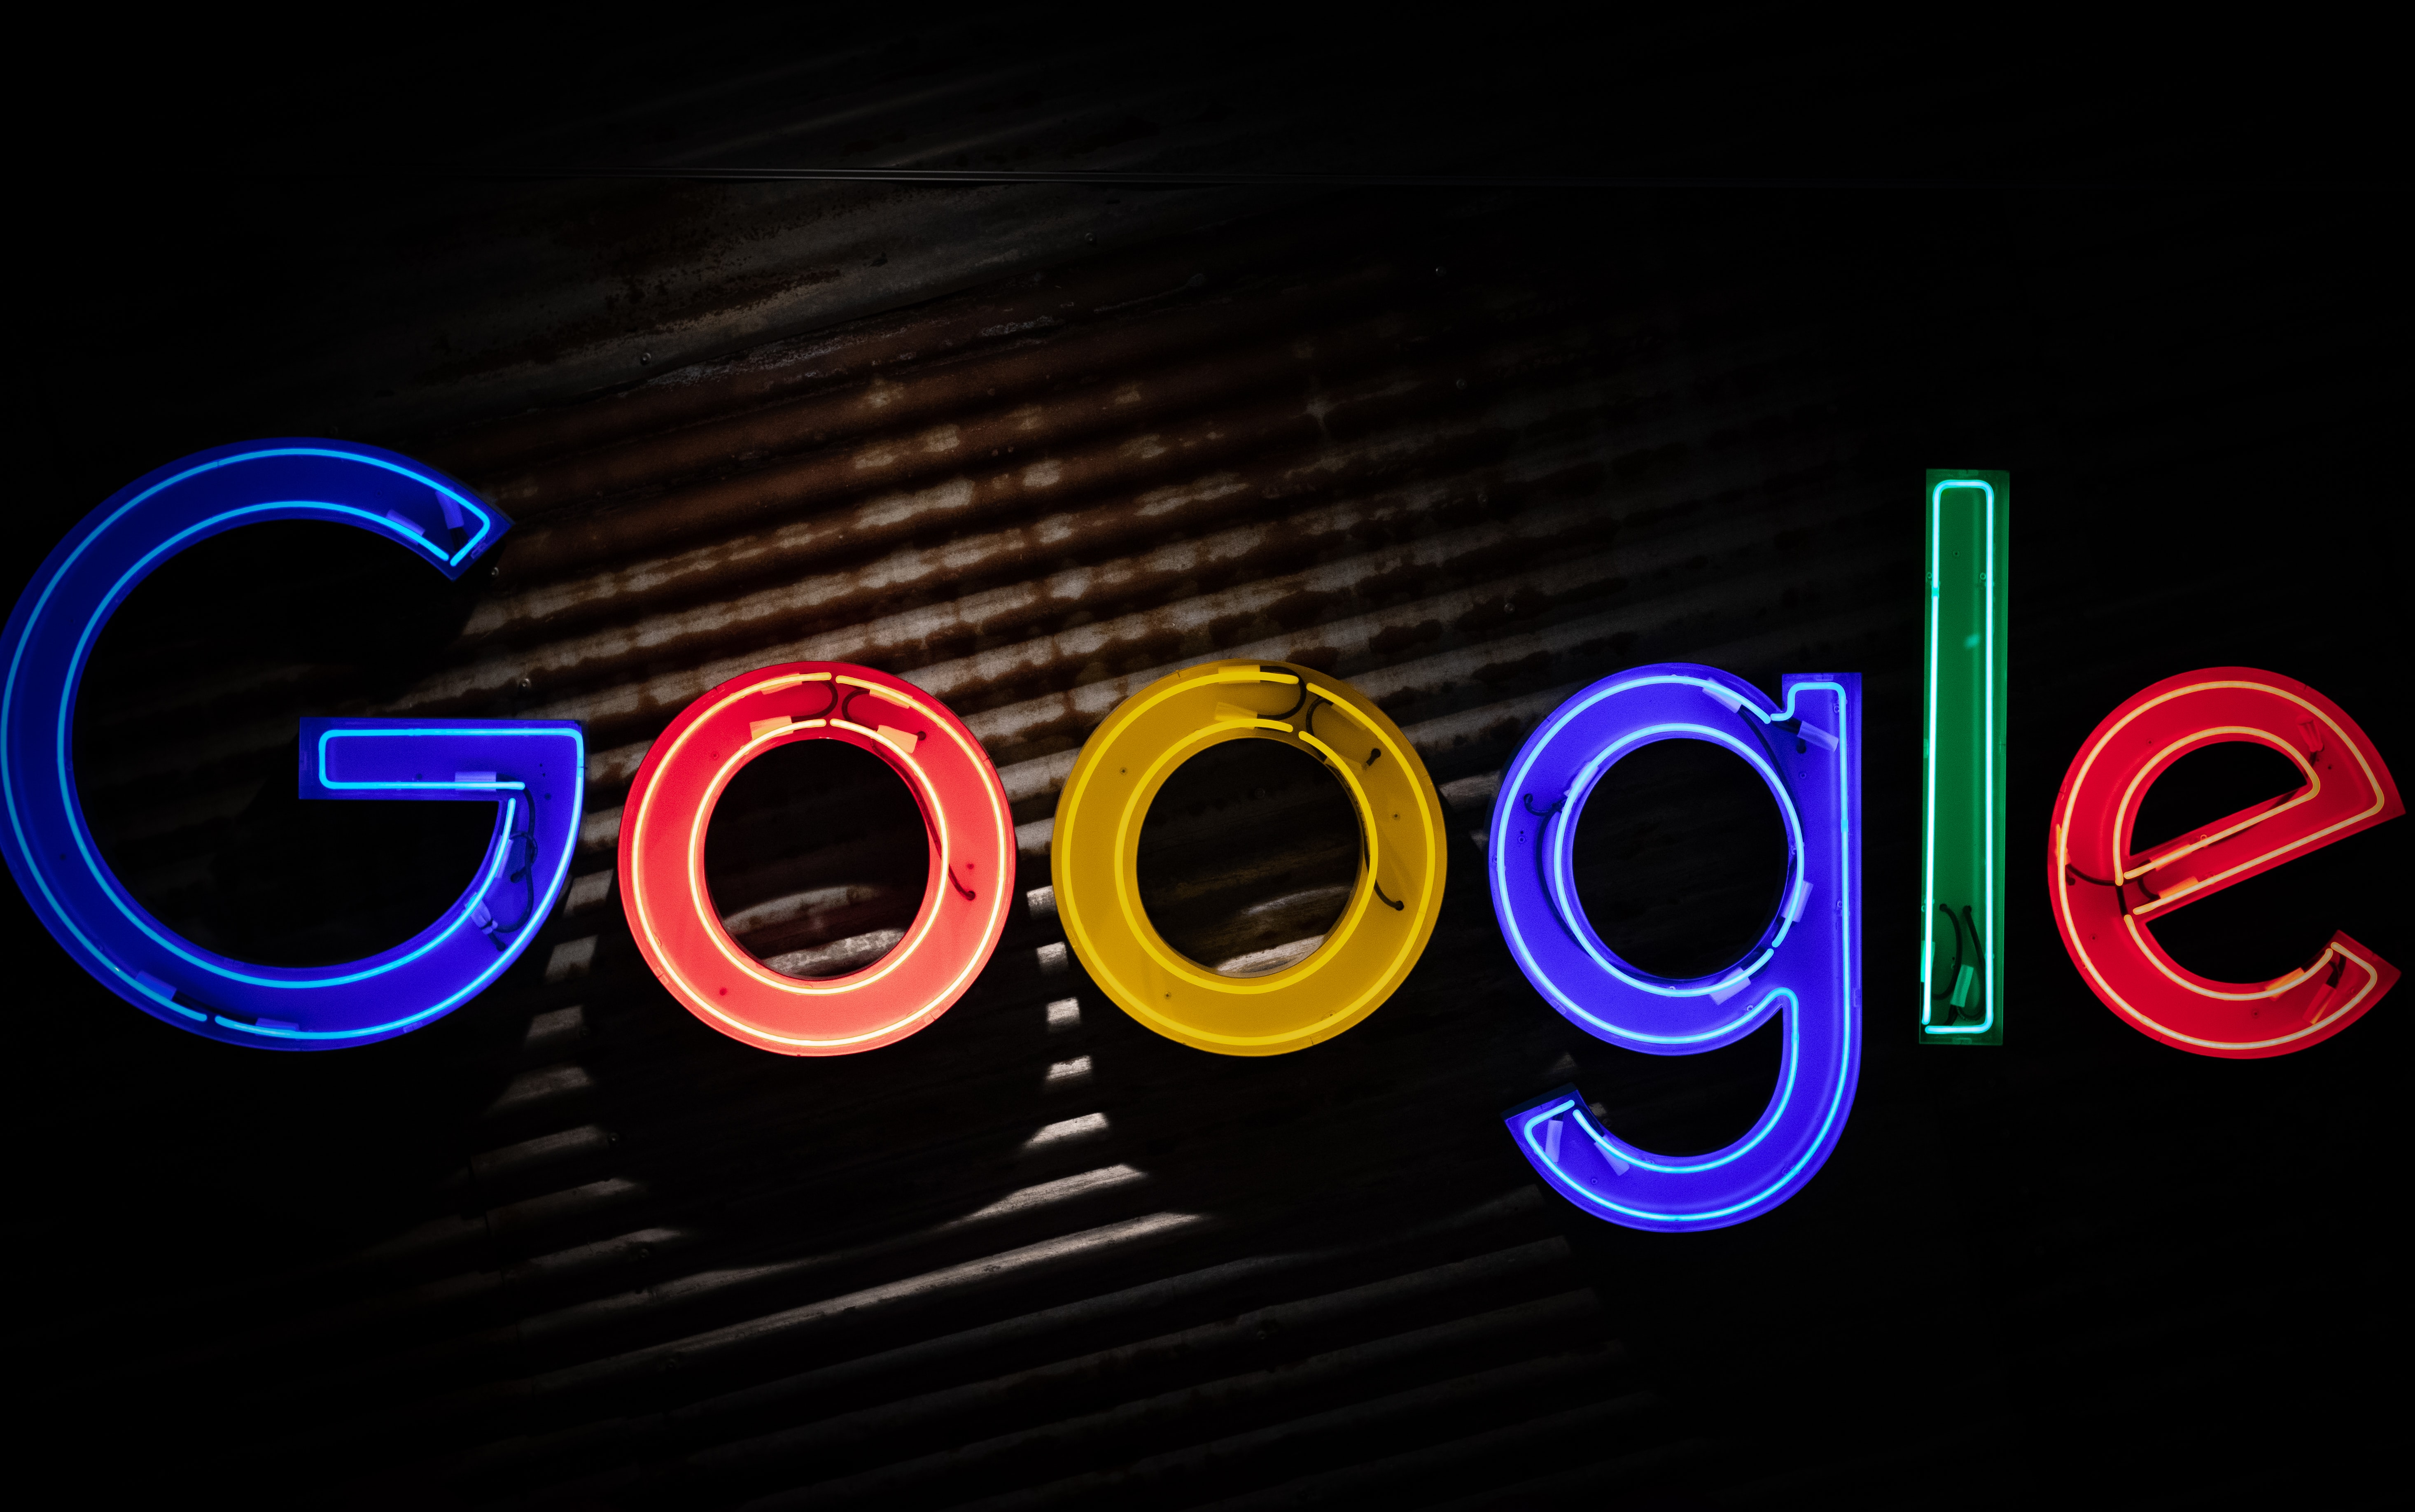 Google records more ‘Bitcoin halving‘ searches than ever before